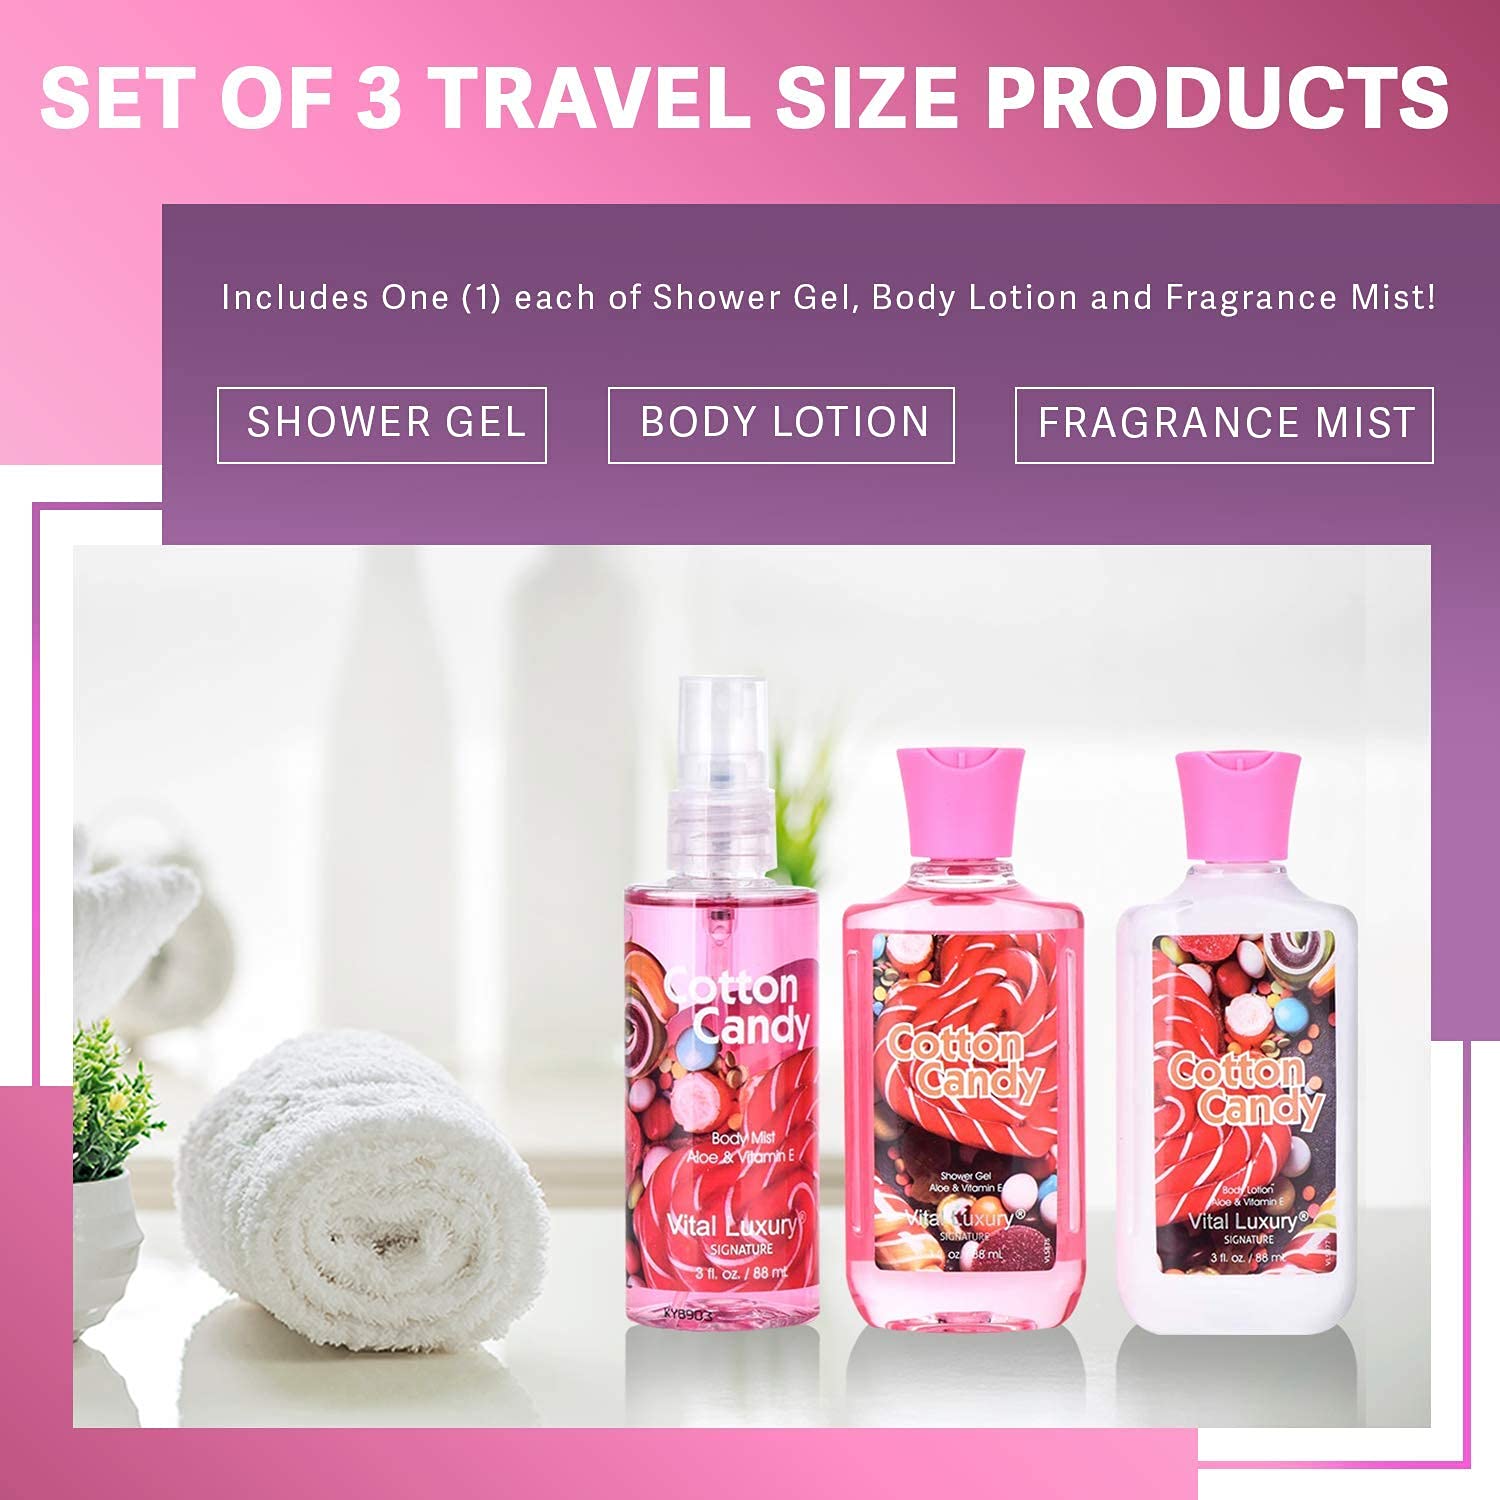 Vital Luxury Bath&Body Care Travel Set,Home Spa Set for Unisex,Cotton Candy Scents